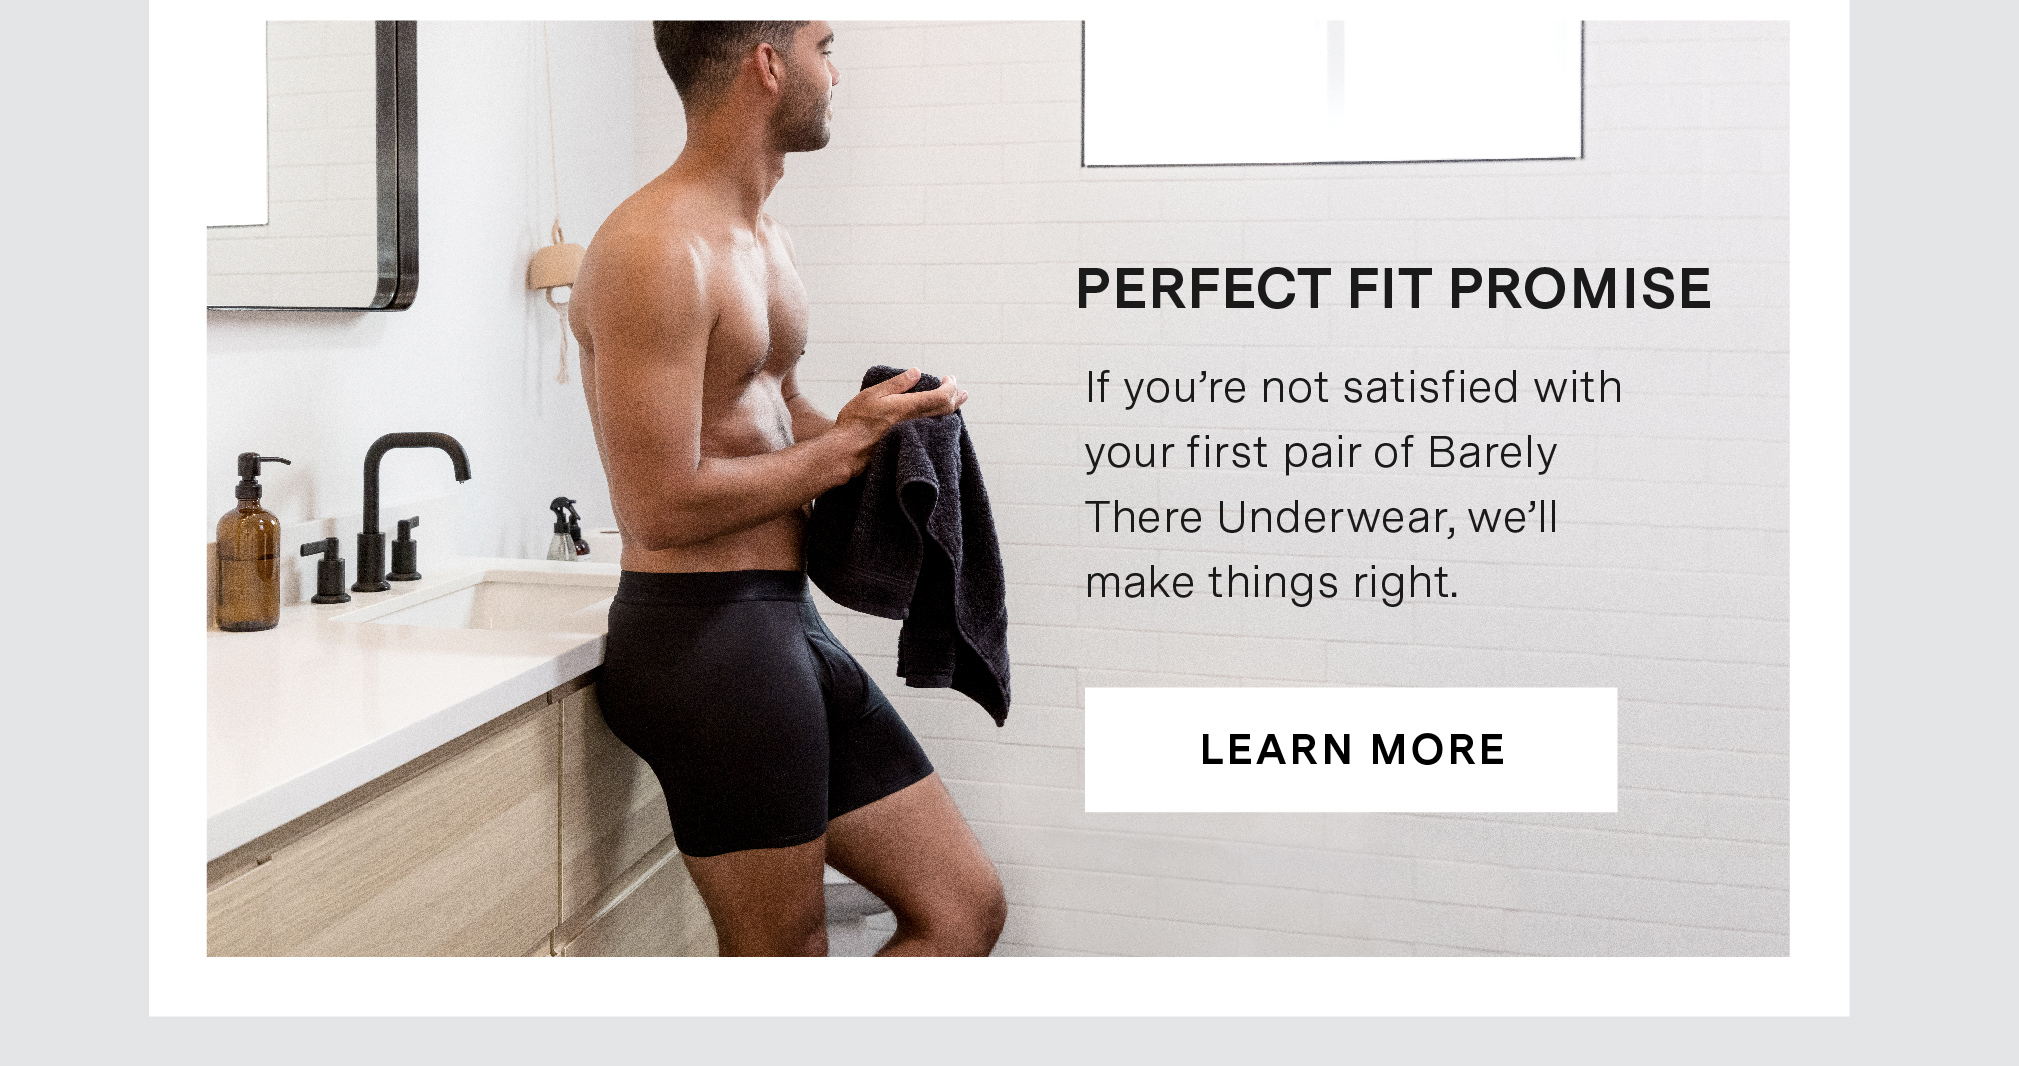 PERFECT FIT PROMISE - If you're not satisfied with your first pair of Barely There Underwear, we'll make things right.